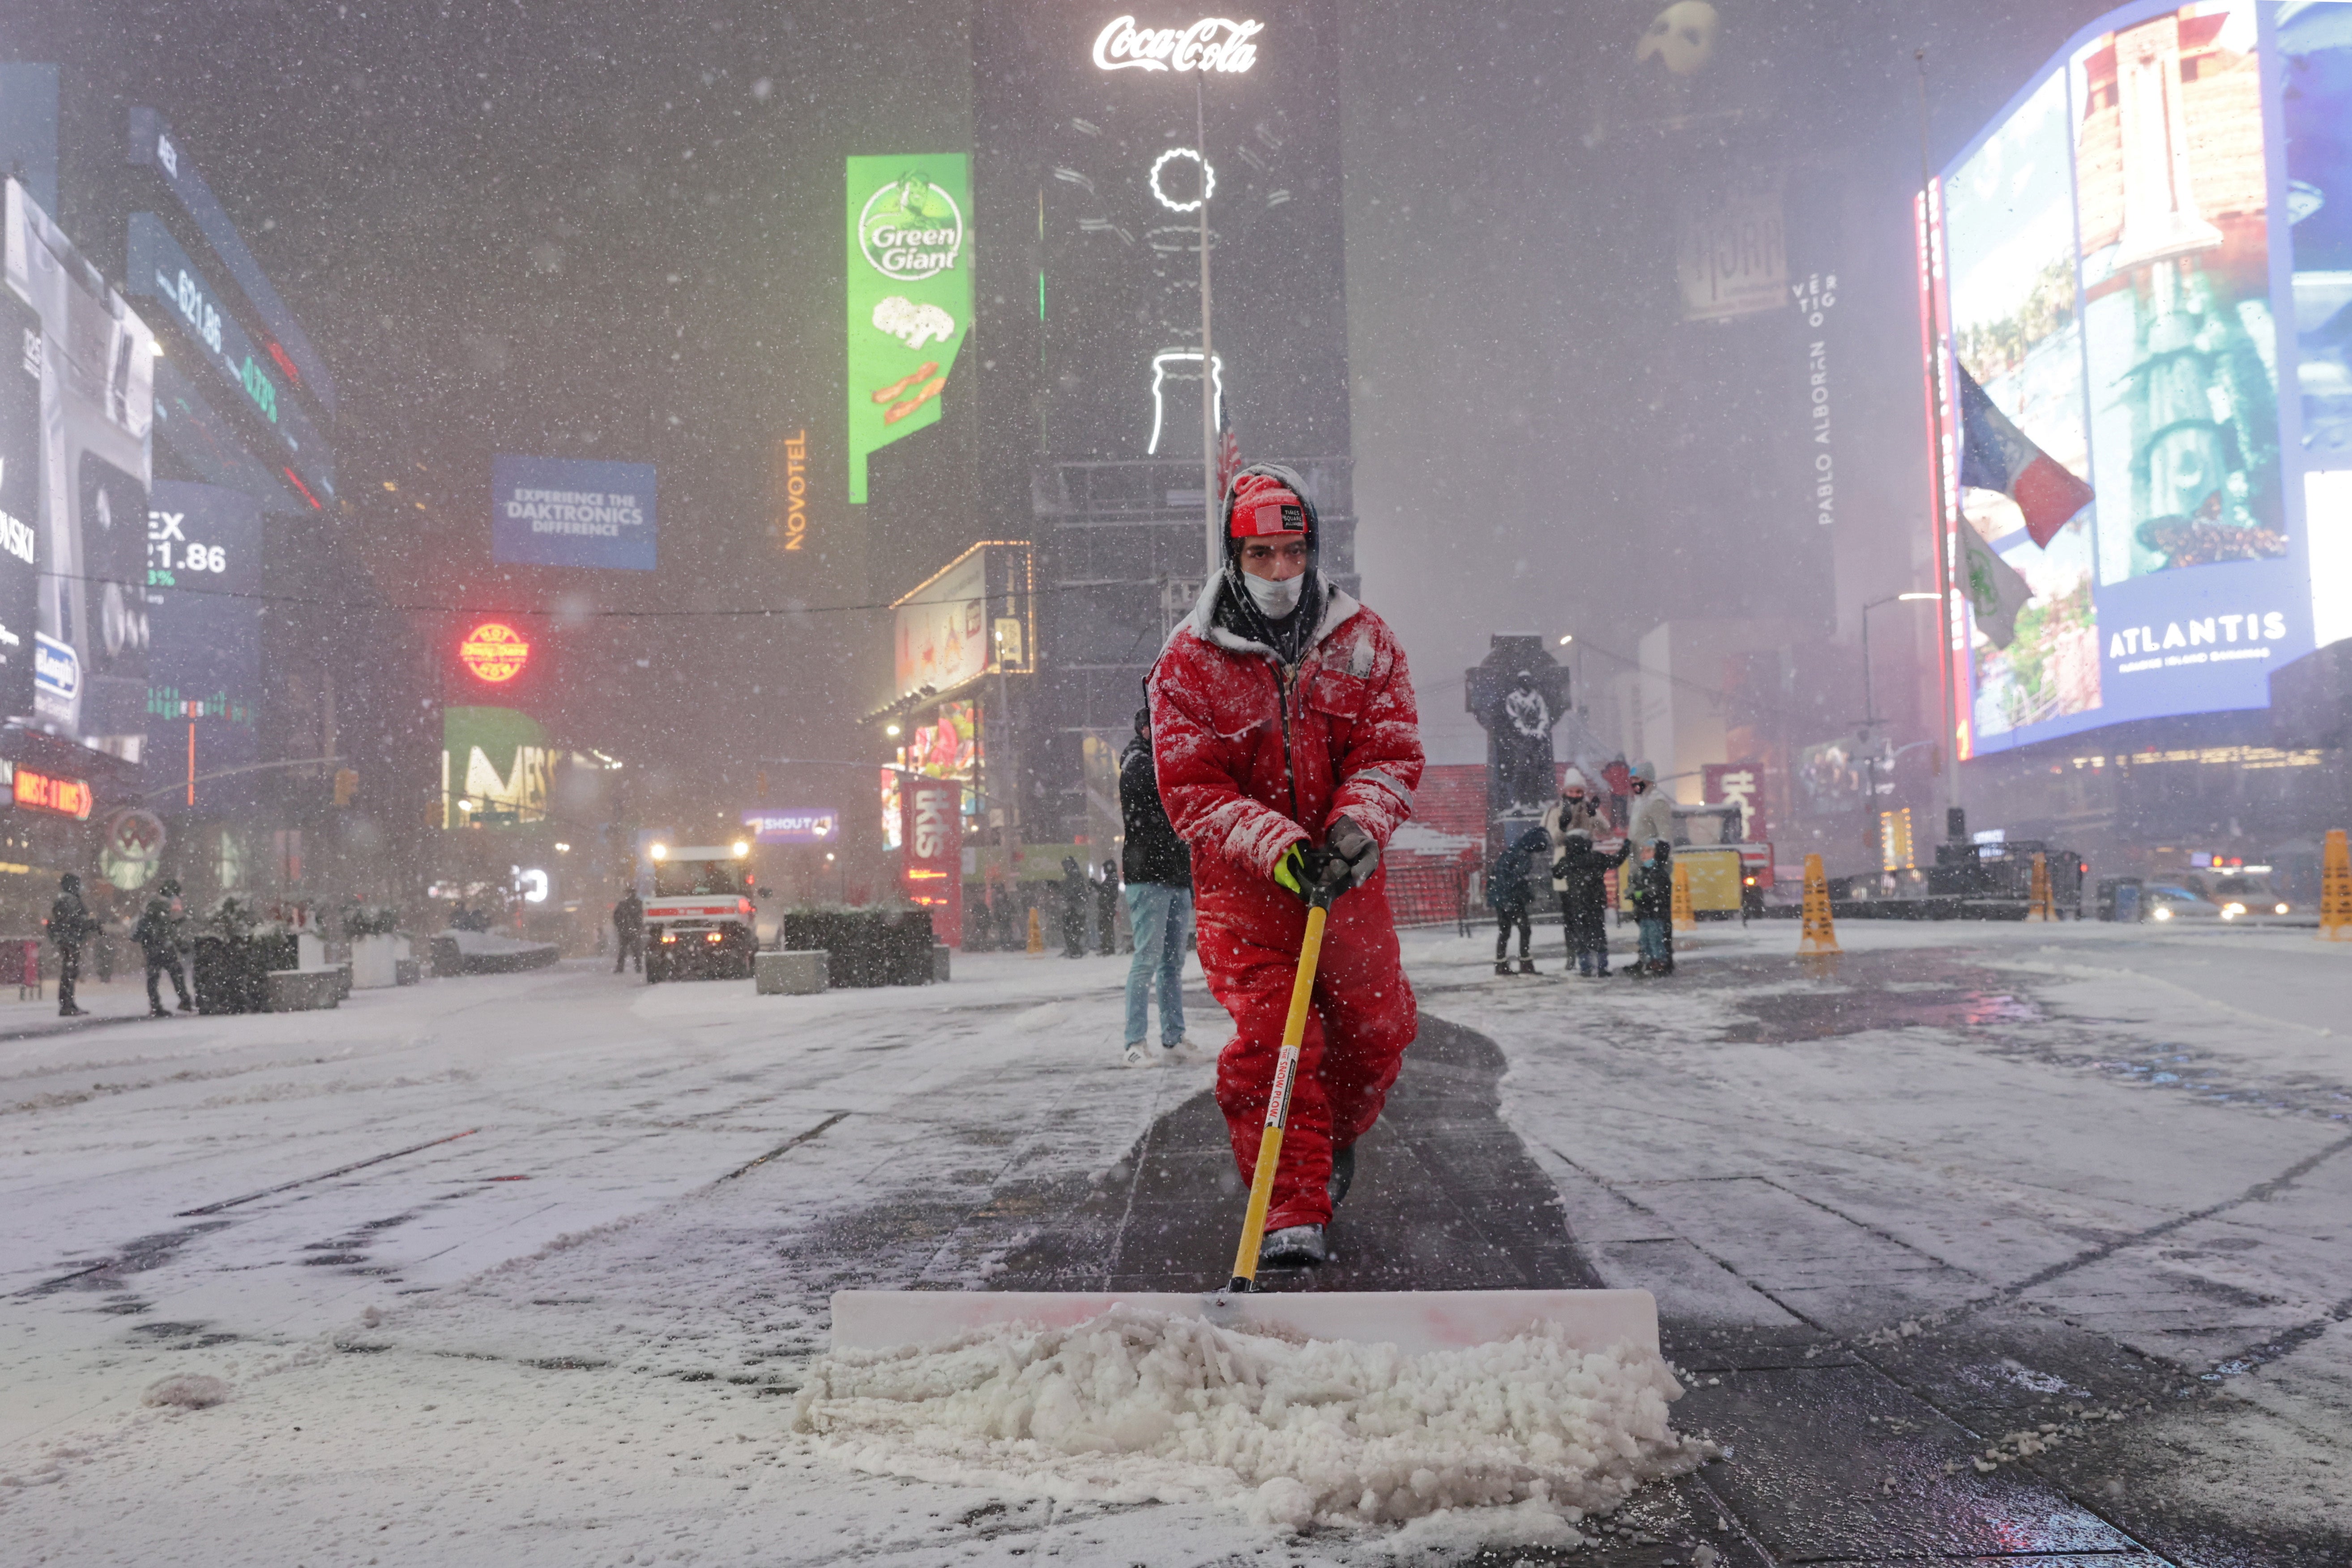 Snow begins to fall in Times Square during a Nor'easter, in New York City on 16 December.